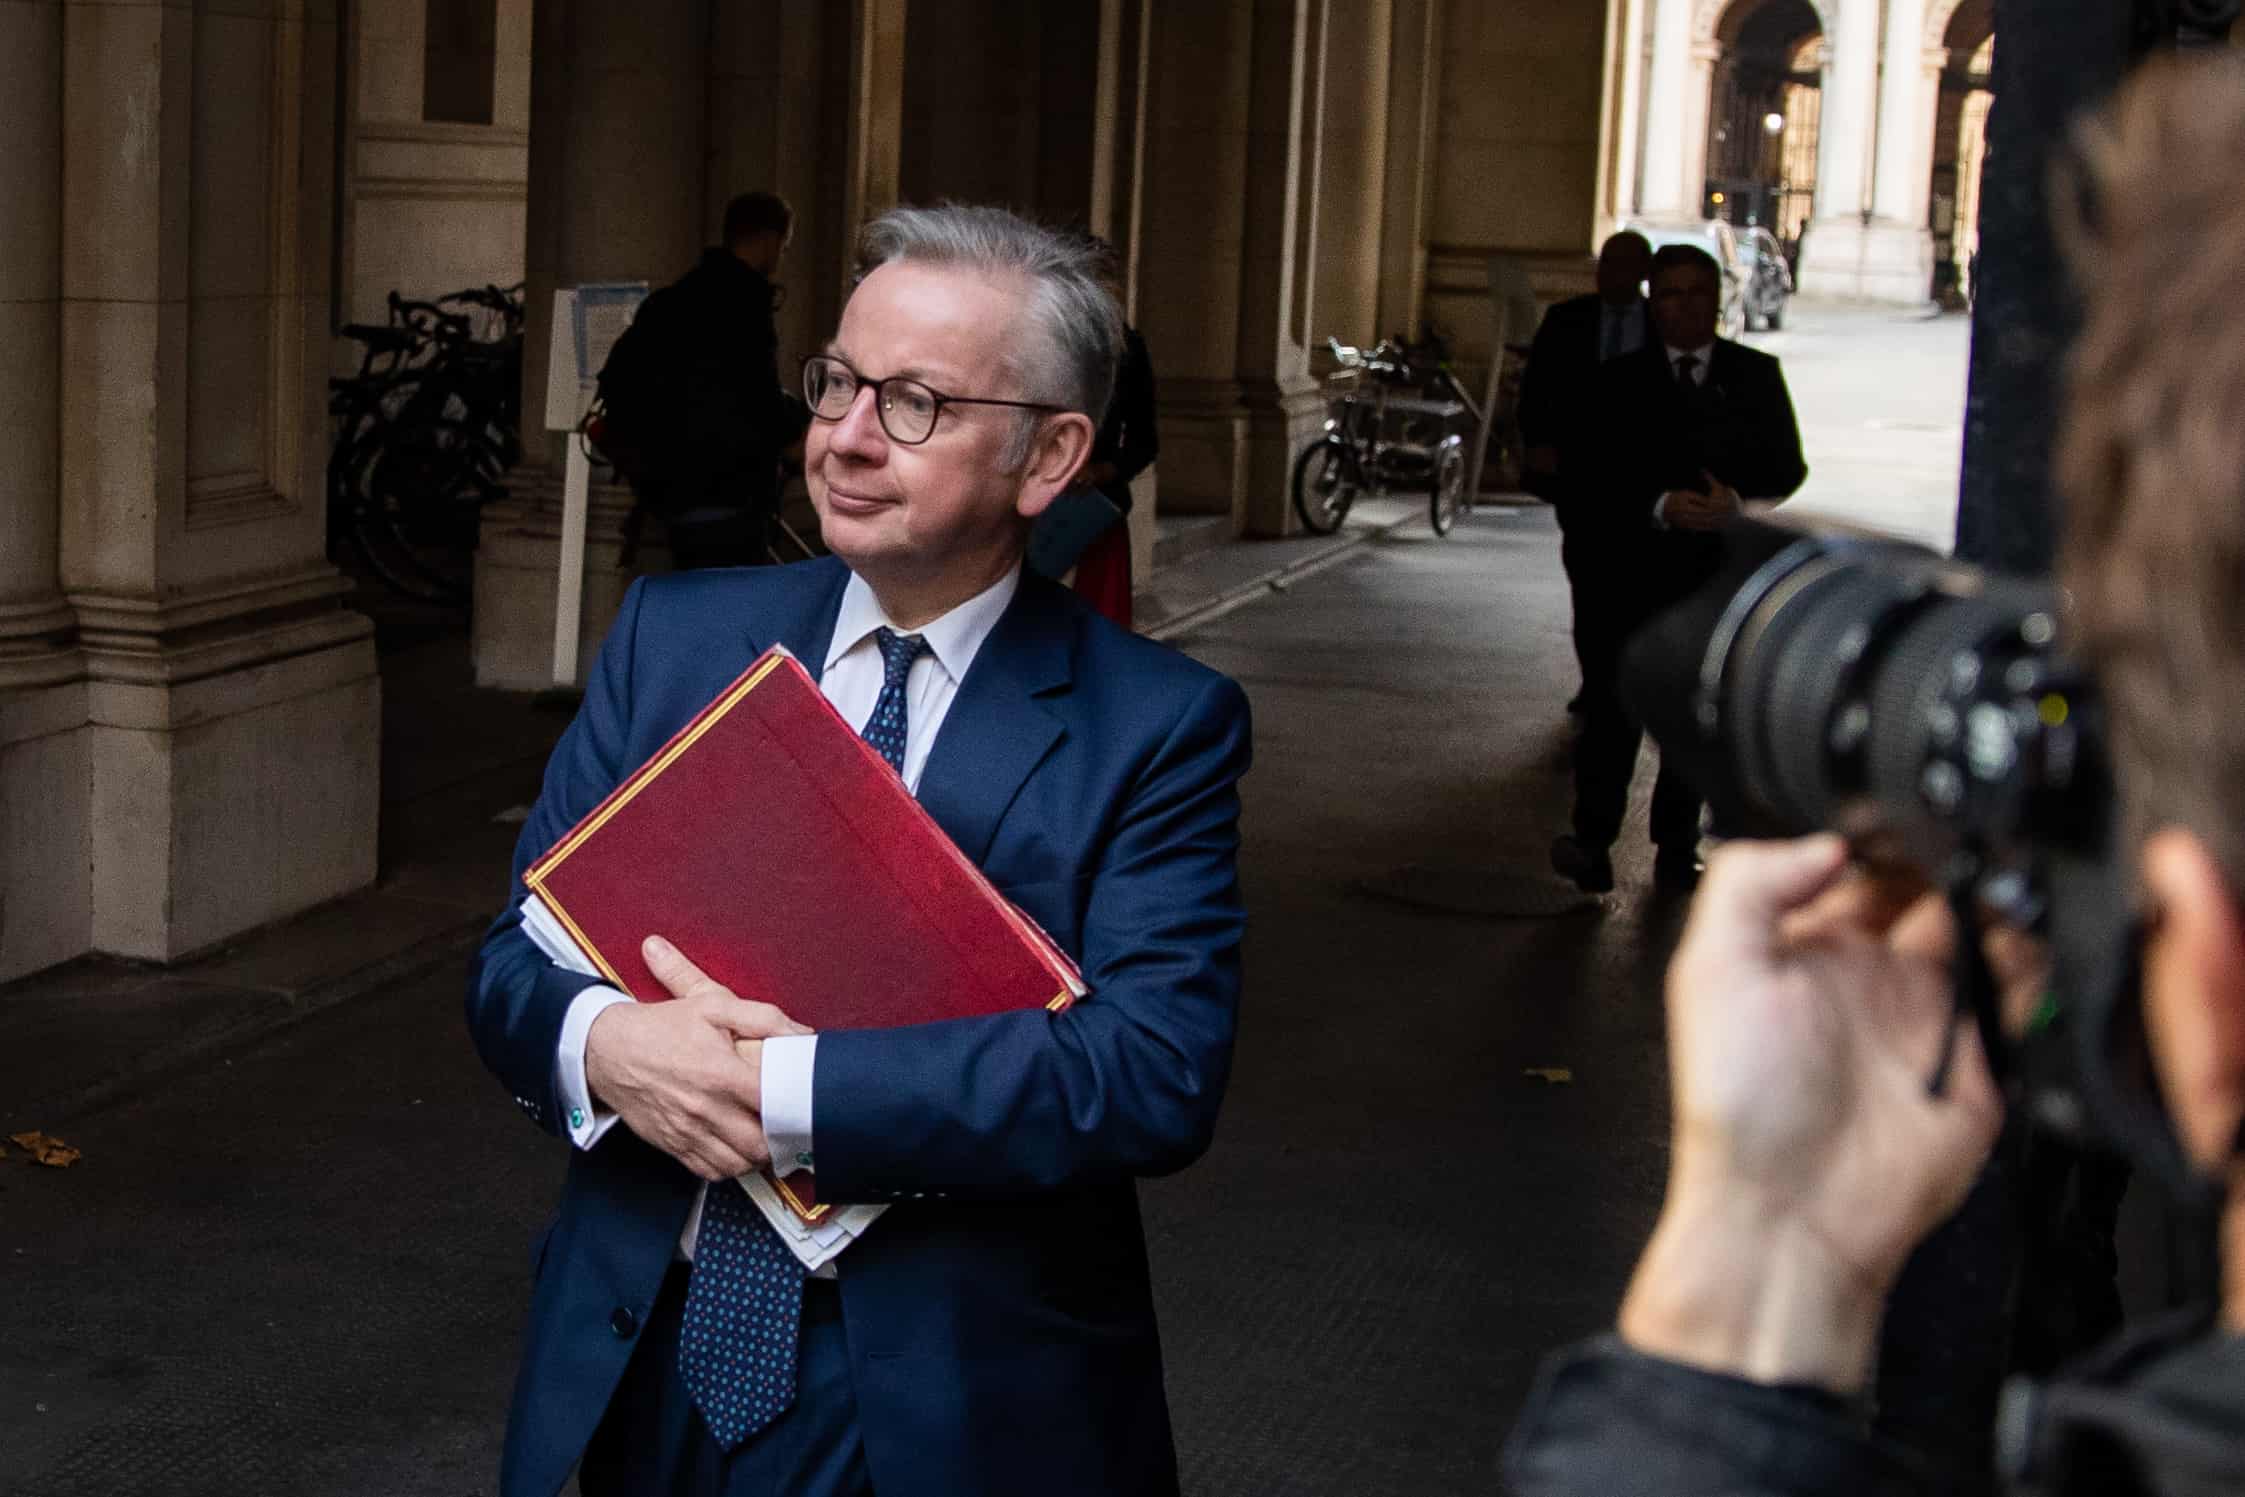 WATCH: Remember when Gove promised UK would “hold all the cards” after Brexit?